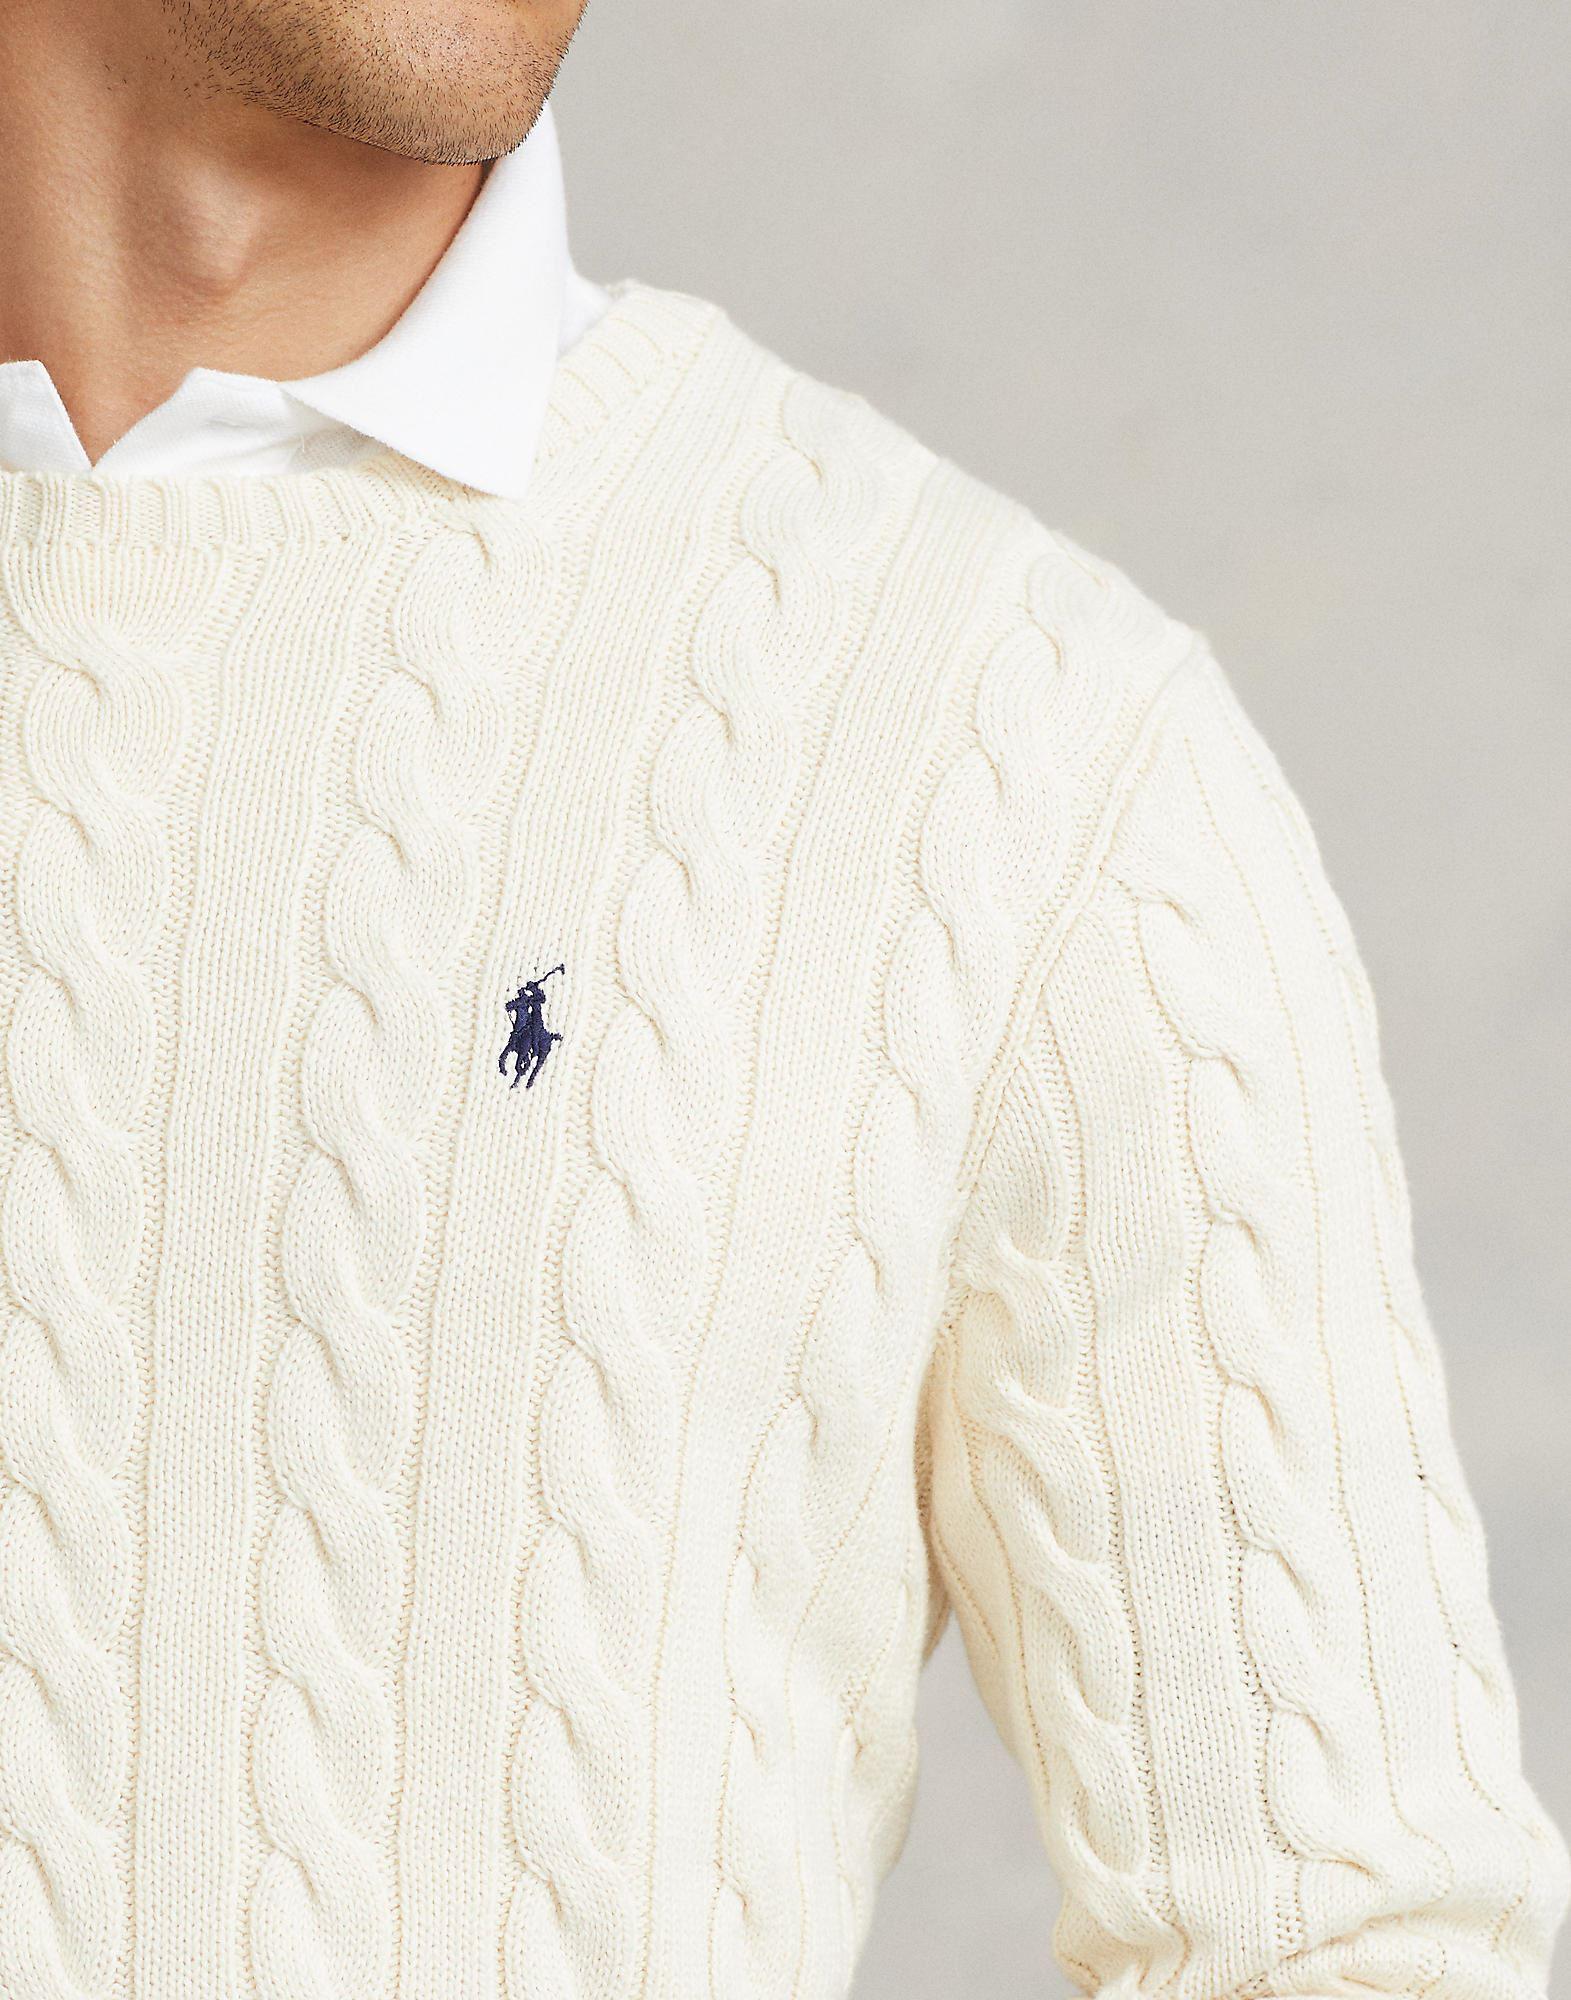 Polo Ralph Lauren Cotton Sweater in Ivory (White) for Men - Save 67% - Lyst